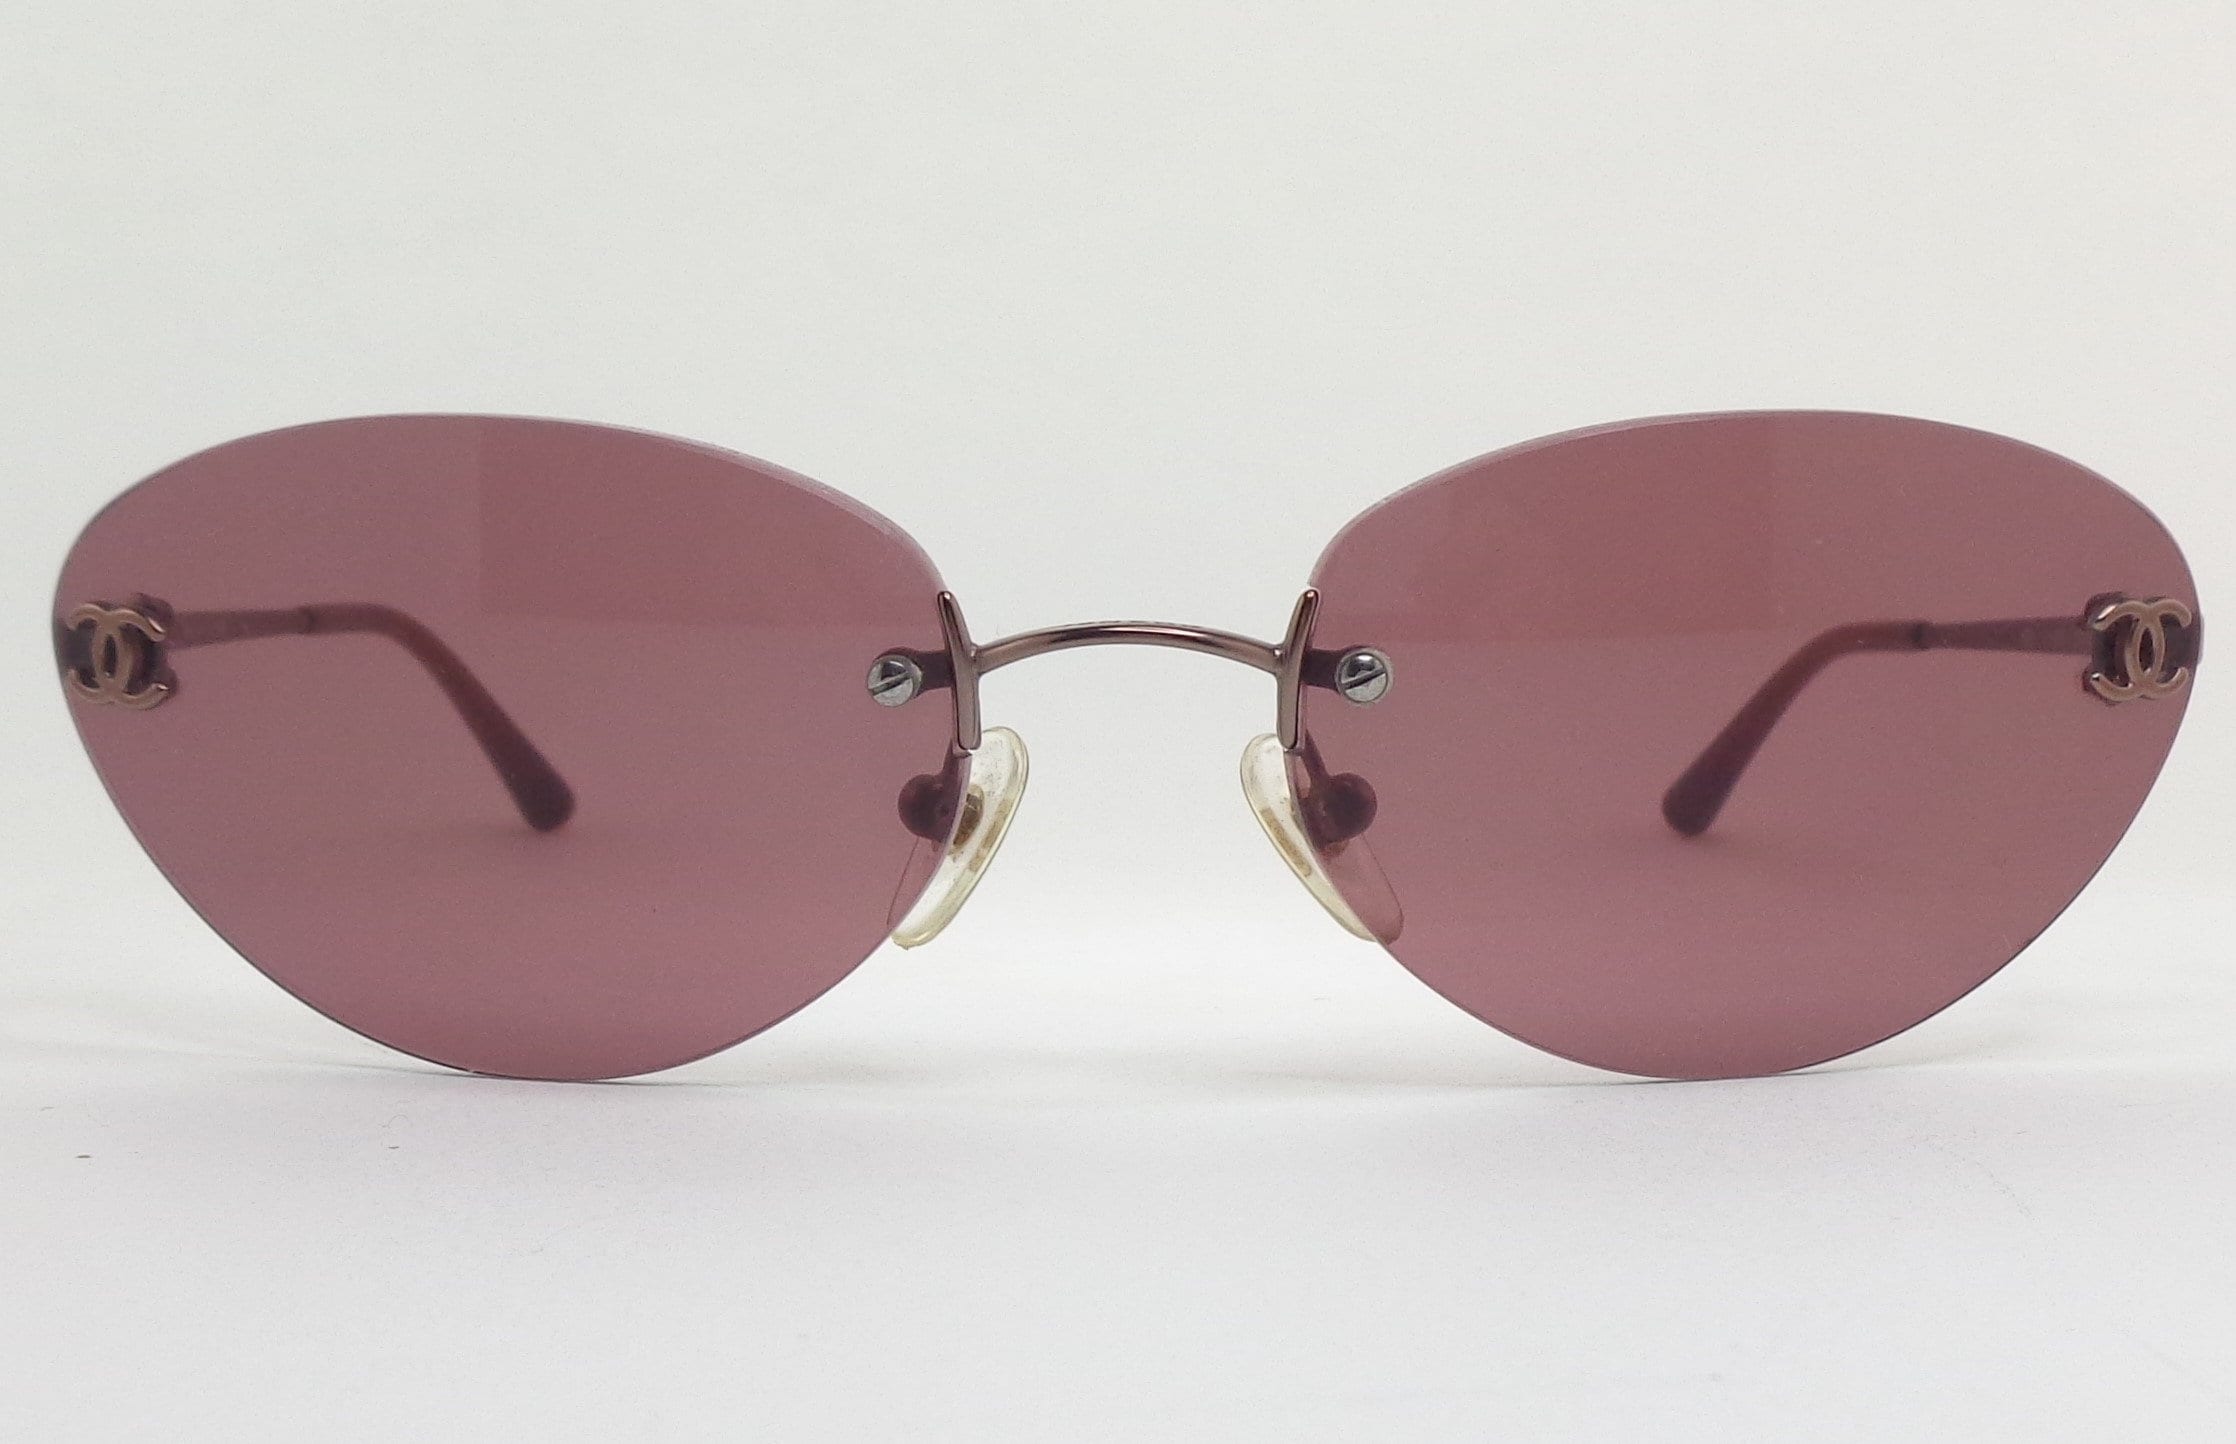 Chanel 4003 Vintage Sunglasses Made in Italy -  India